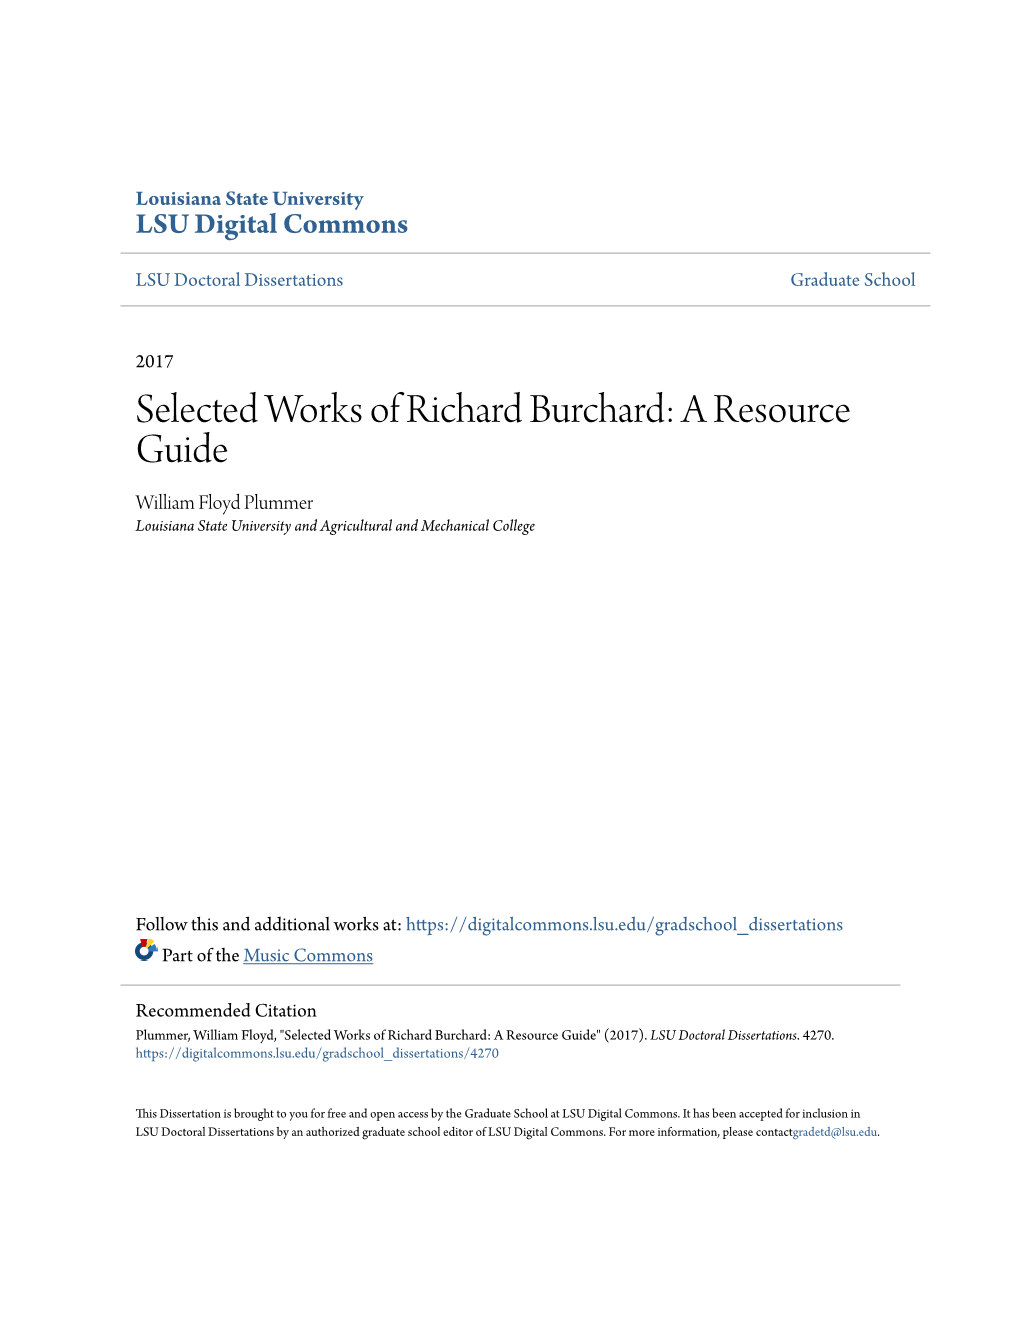 Selected Works of Richard Burchard: a Resource Guide William Floyd Plummer Louisiana State University and Agricultural and Mechanical College